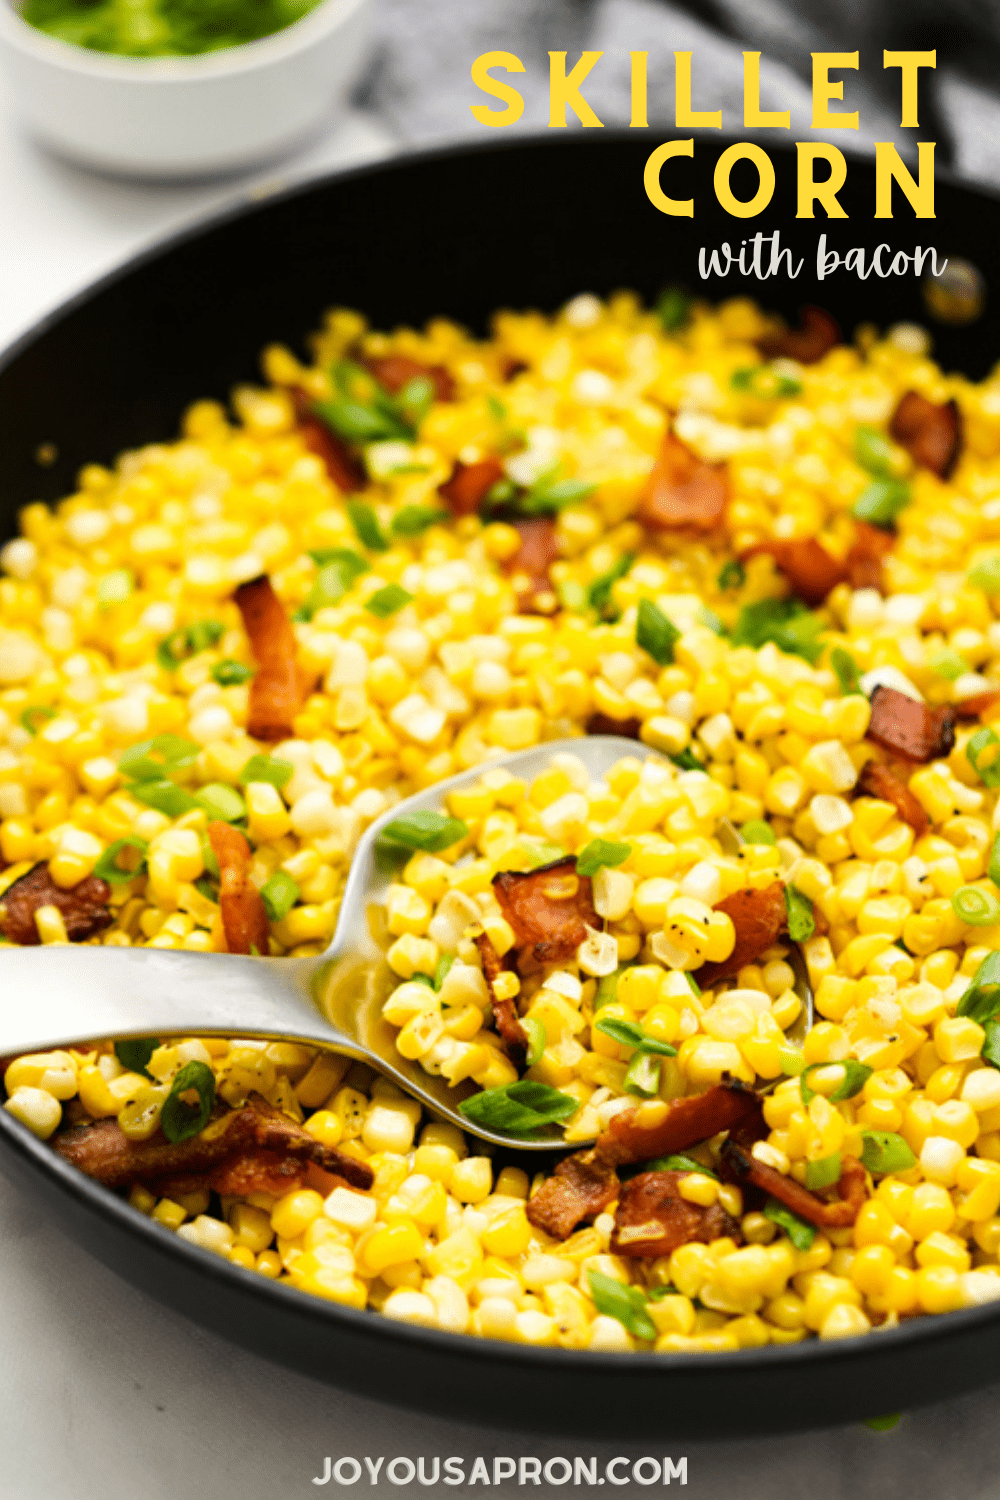 Skillet Corn with Bacon - Easy and delicious pan fried corn recipe! Combined with bacon pieces and bacon grease for amazing flavors. A yummy vegetable side dish ready under 15 minutes! via @joyousapron